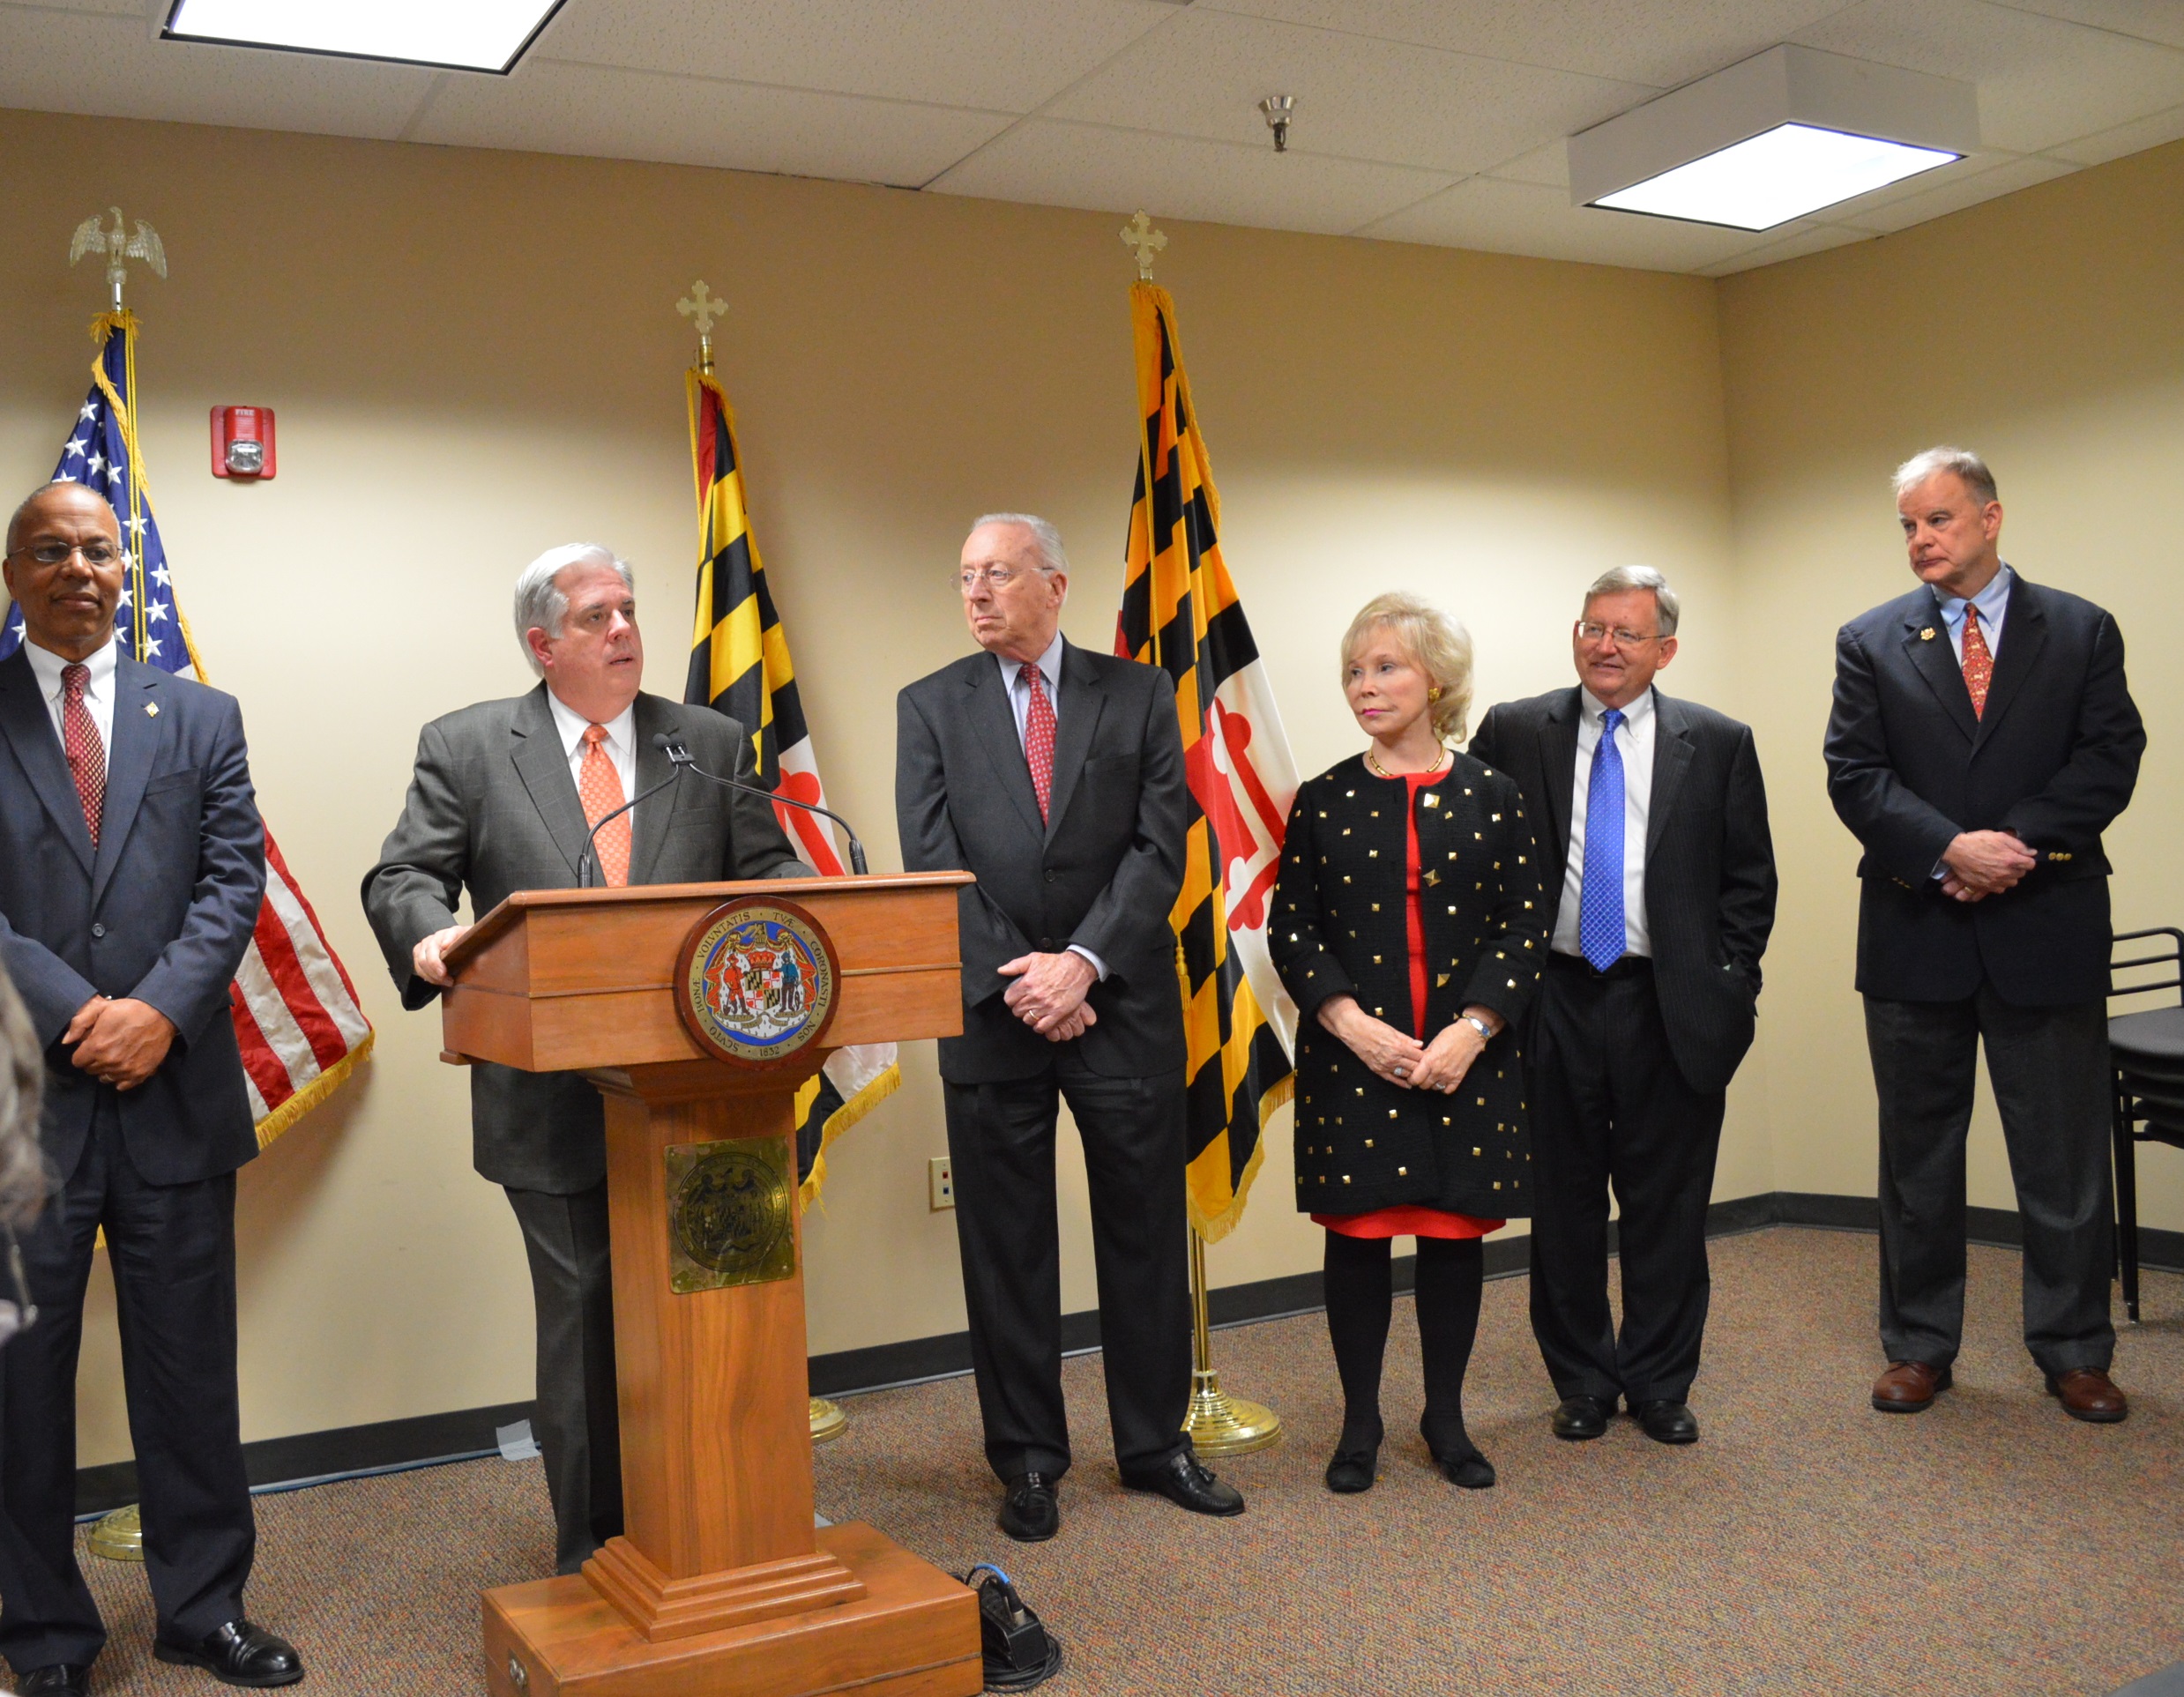 Budget problems even bigger than expected, Hogan says; more of transition team announced